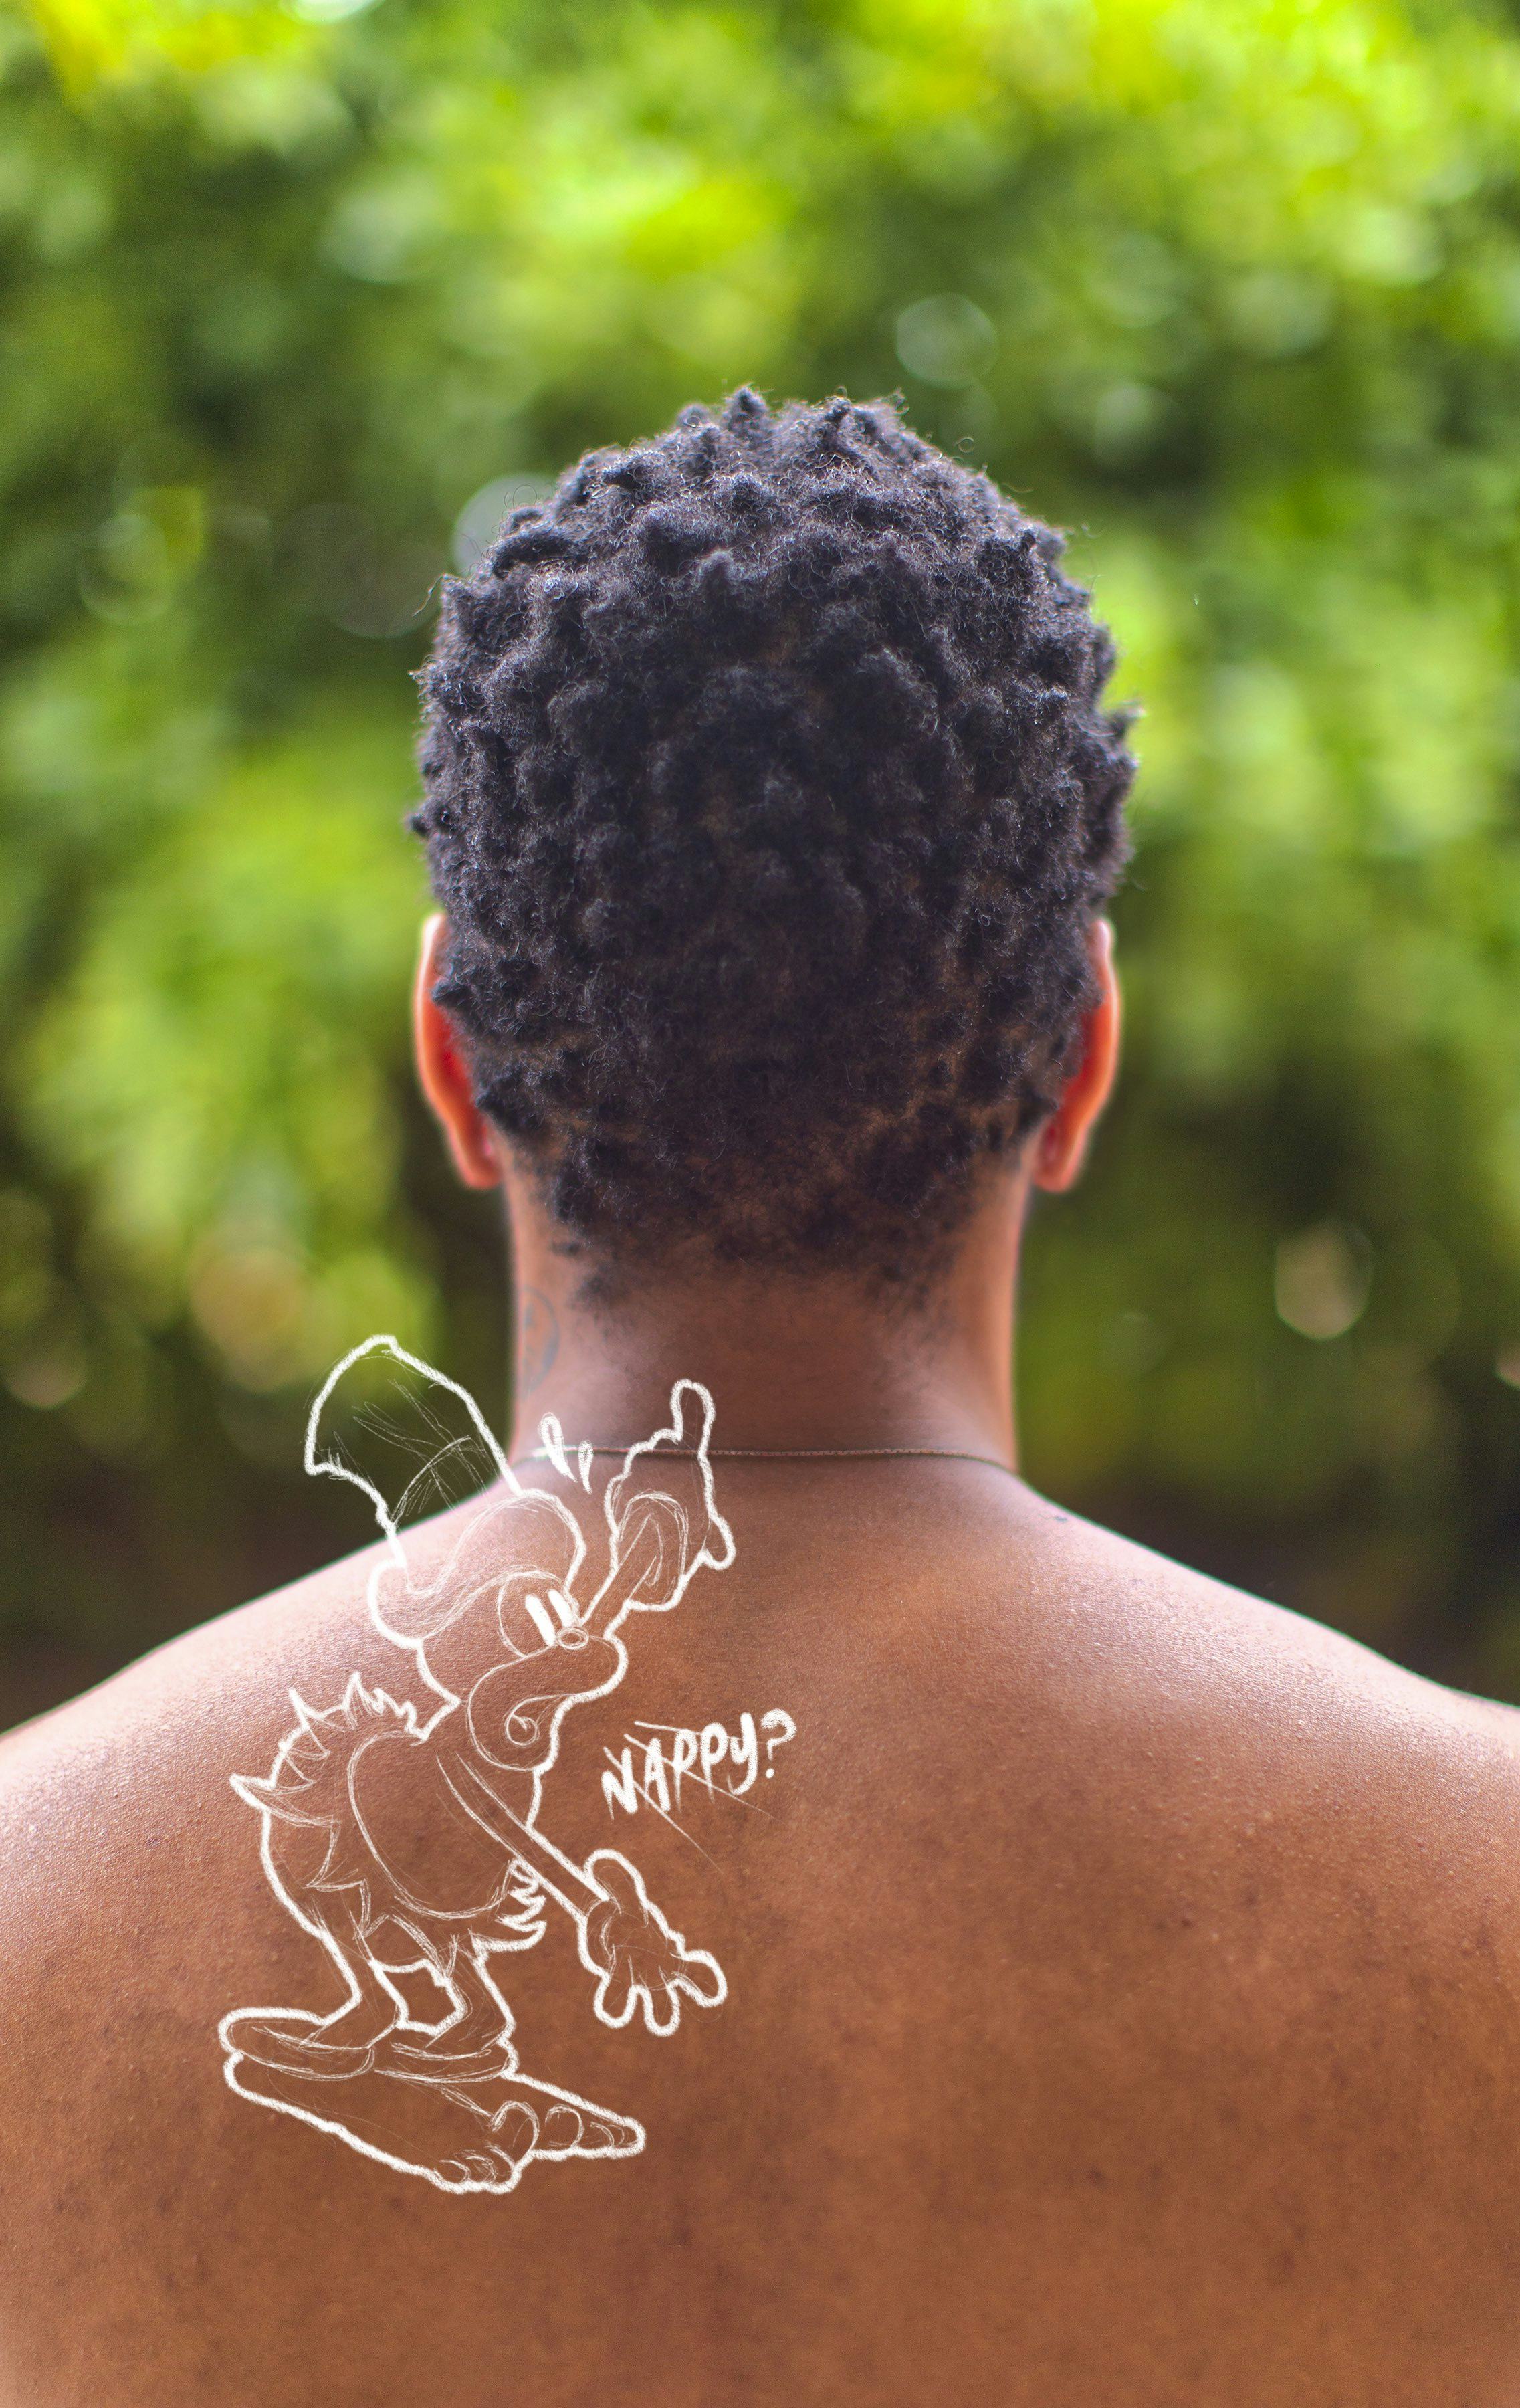 Picture of the back of a Black person, with a drawing on top © André Ramos-Woodard